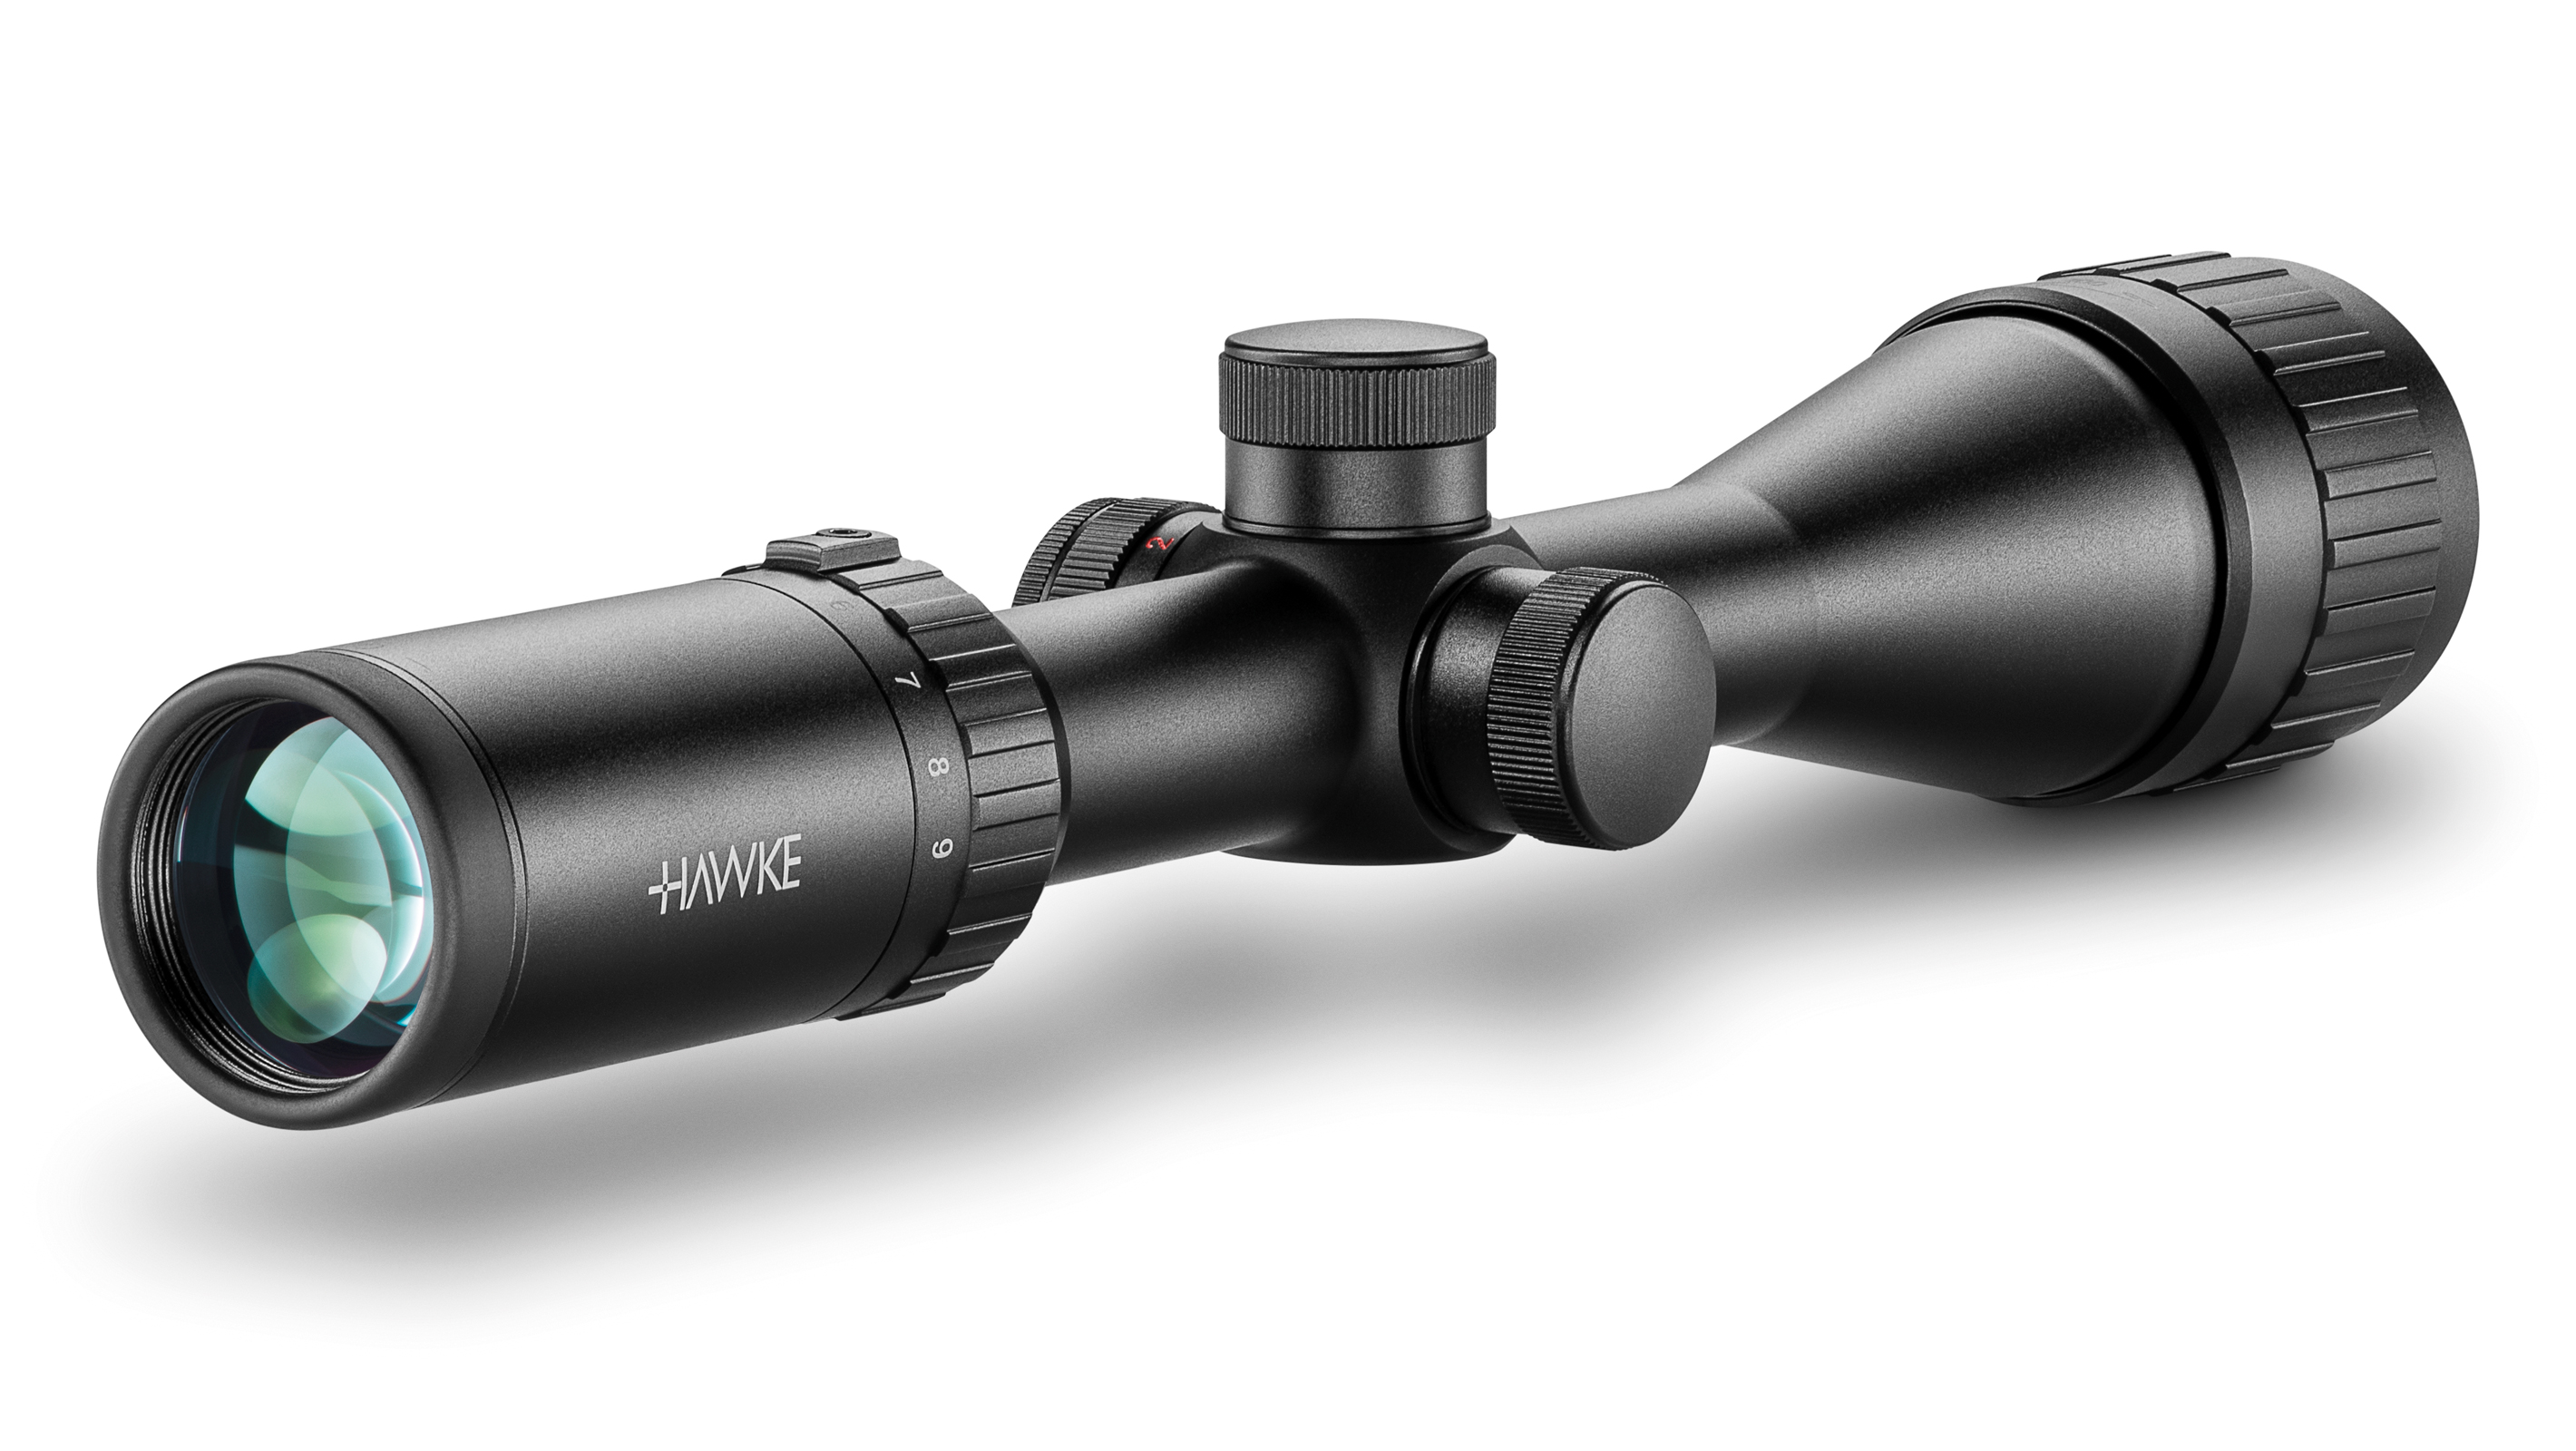 Ocular End View Of The Hawke Vantage IR 3-9x40 AO Mil Dot Rifle Scope